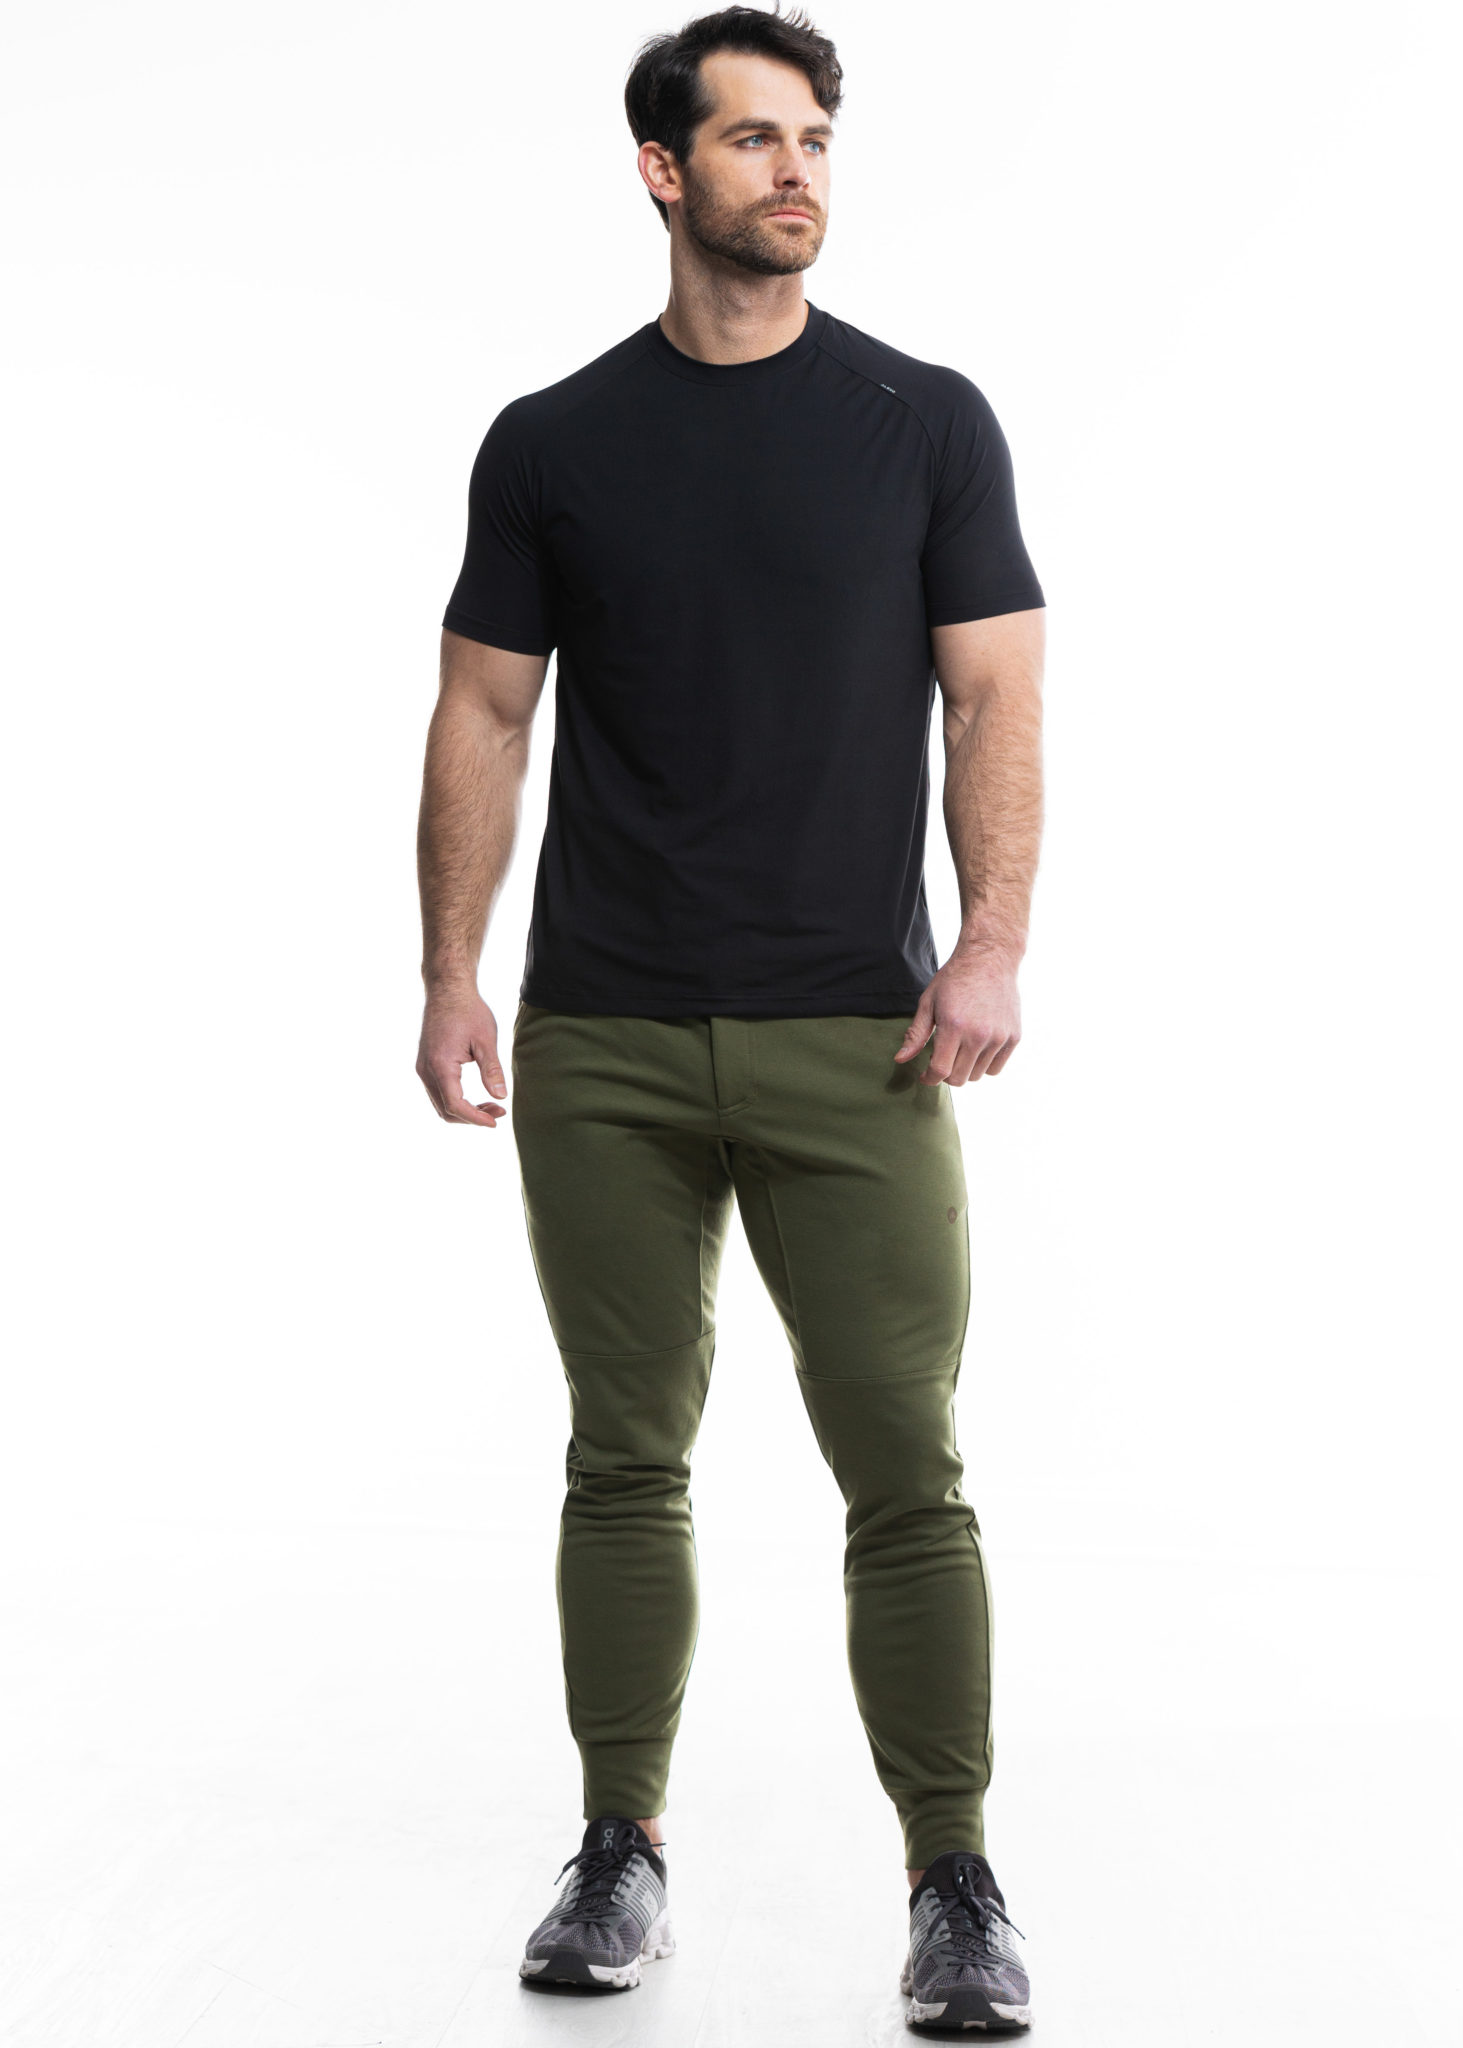 Alexo Athletica Tuck & Carry: The Perfect CCW Pants? - The Armory Life